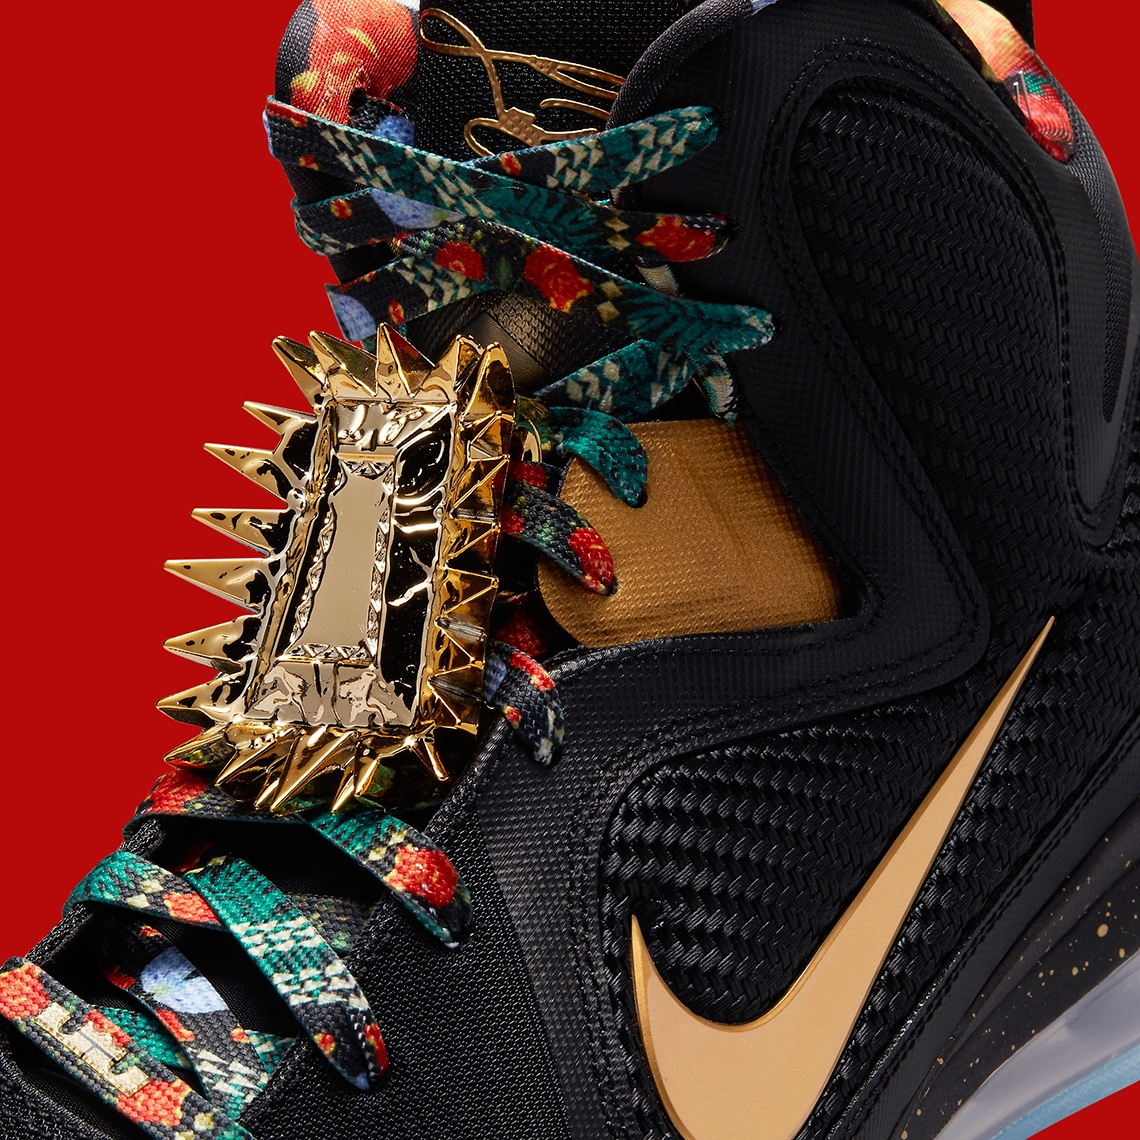 Nike Lebron 9 Watch The Throne Do9353 001 Release Date 2